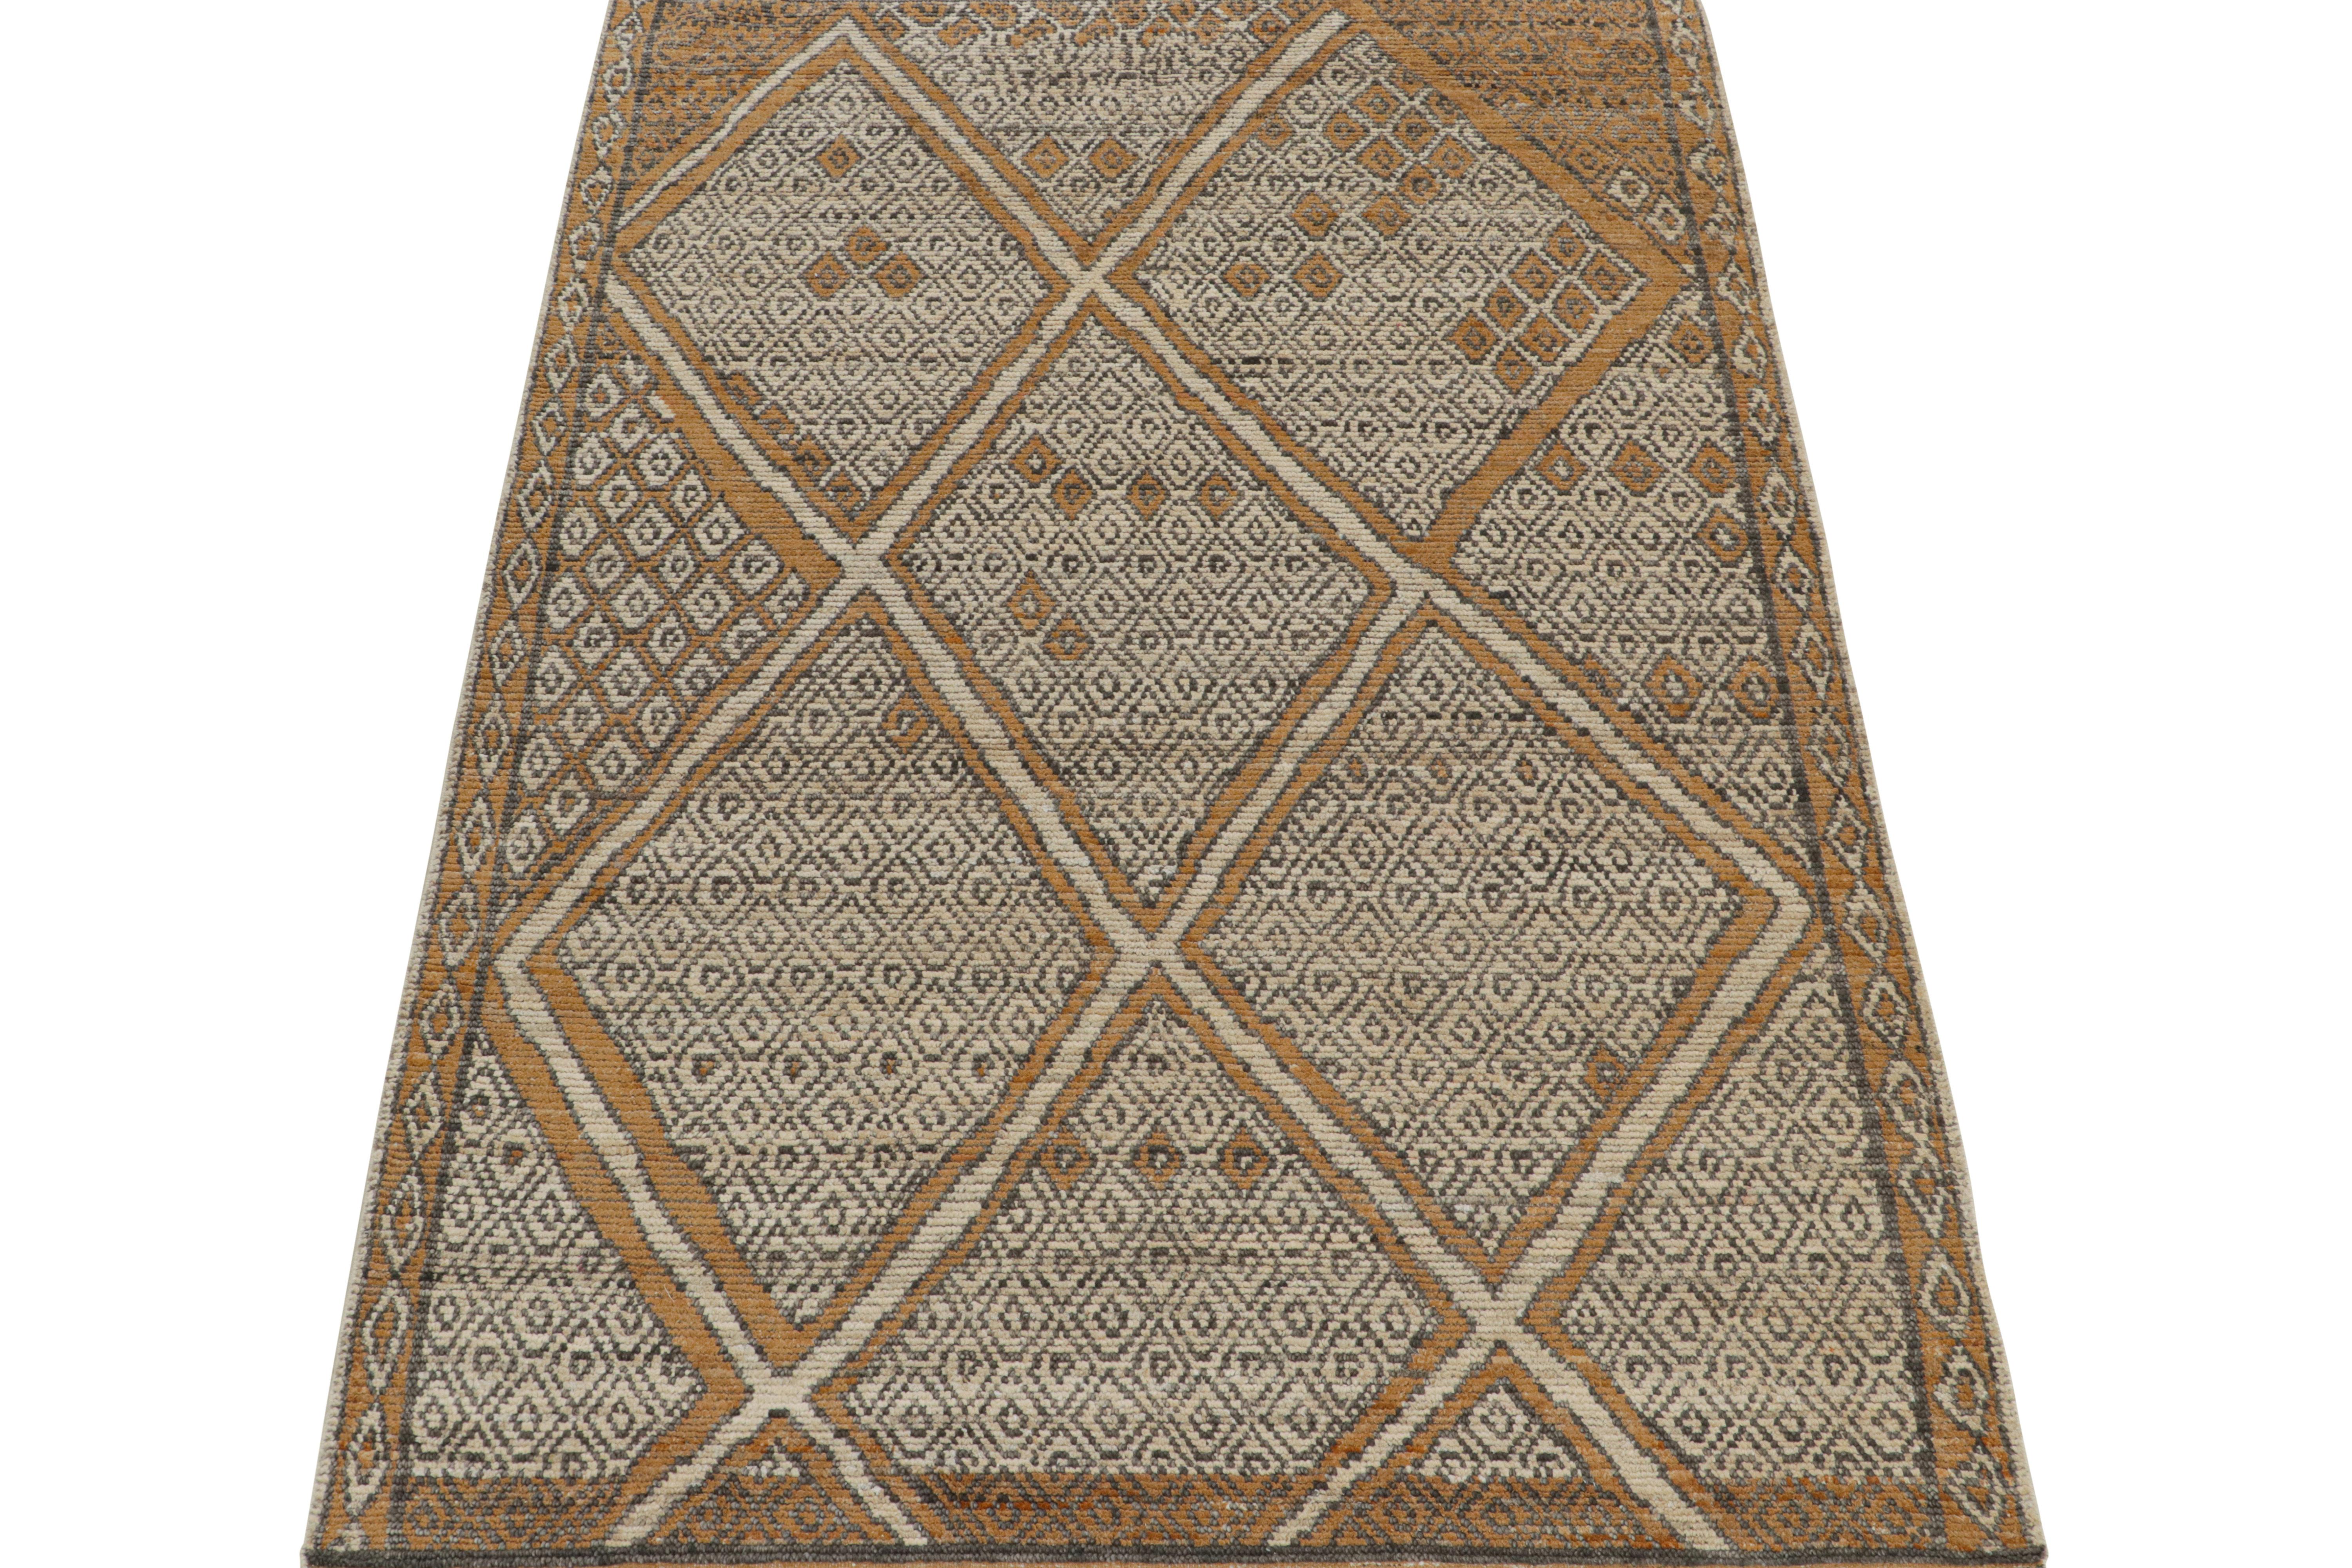 Tribal Rug & Kilim’s Moroccan Style Rug in Auburn Orange and White Diamond Patterns For Sale